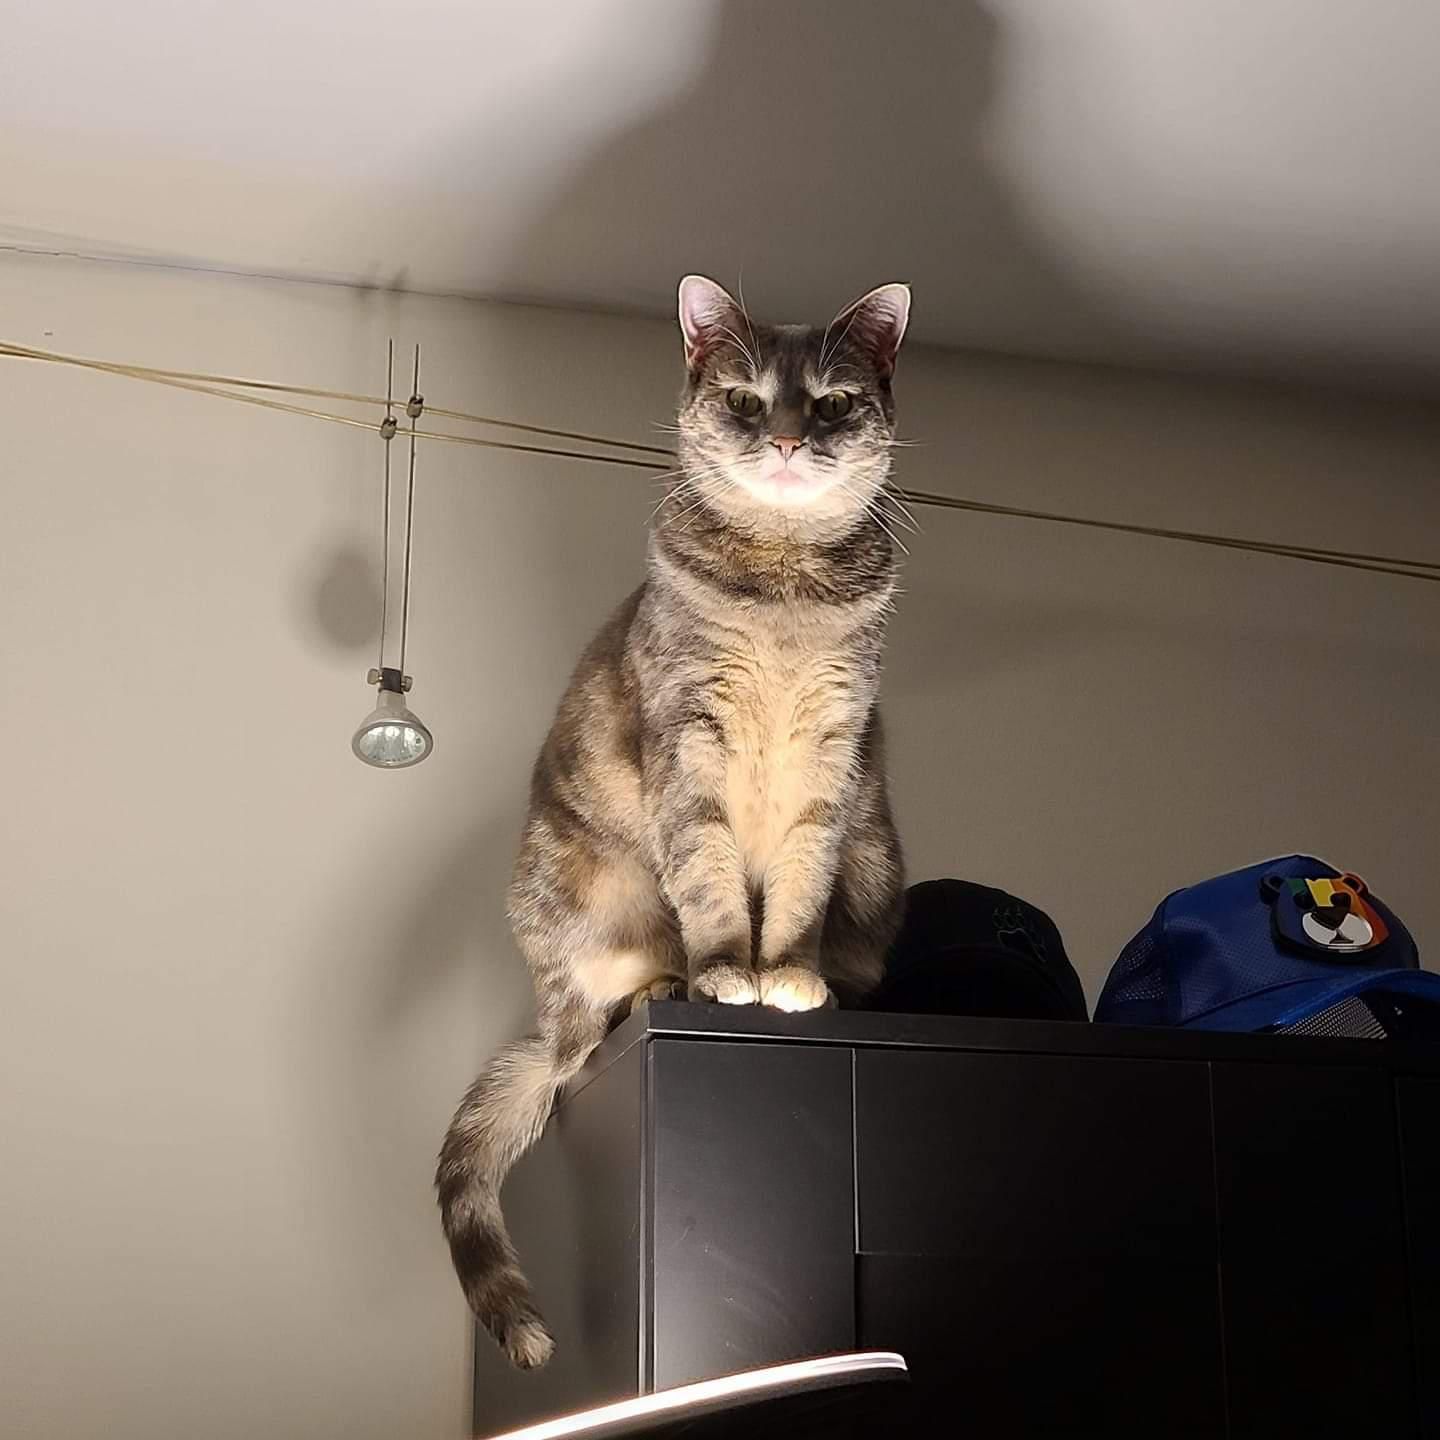 I got a new lamp... then the cat did this.